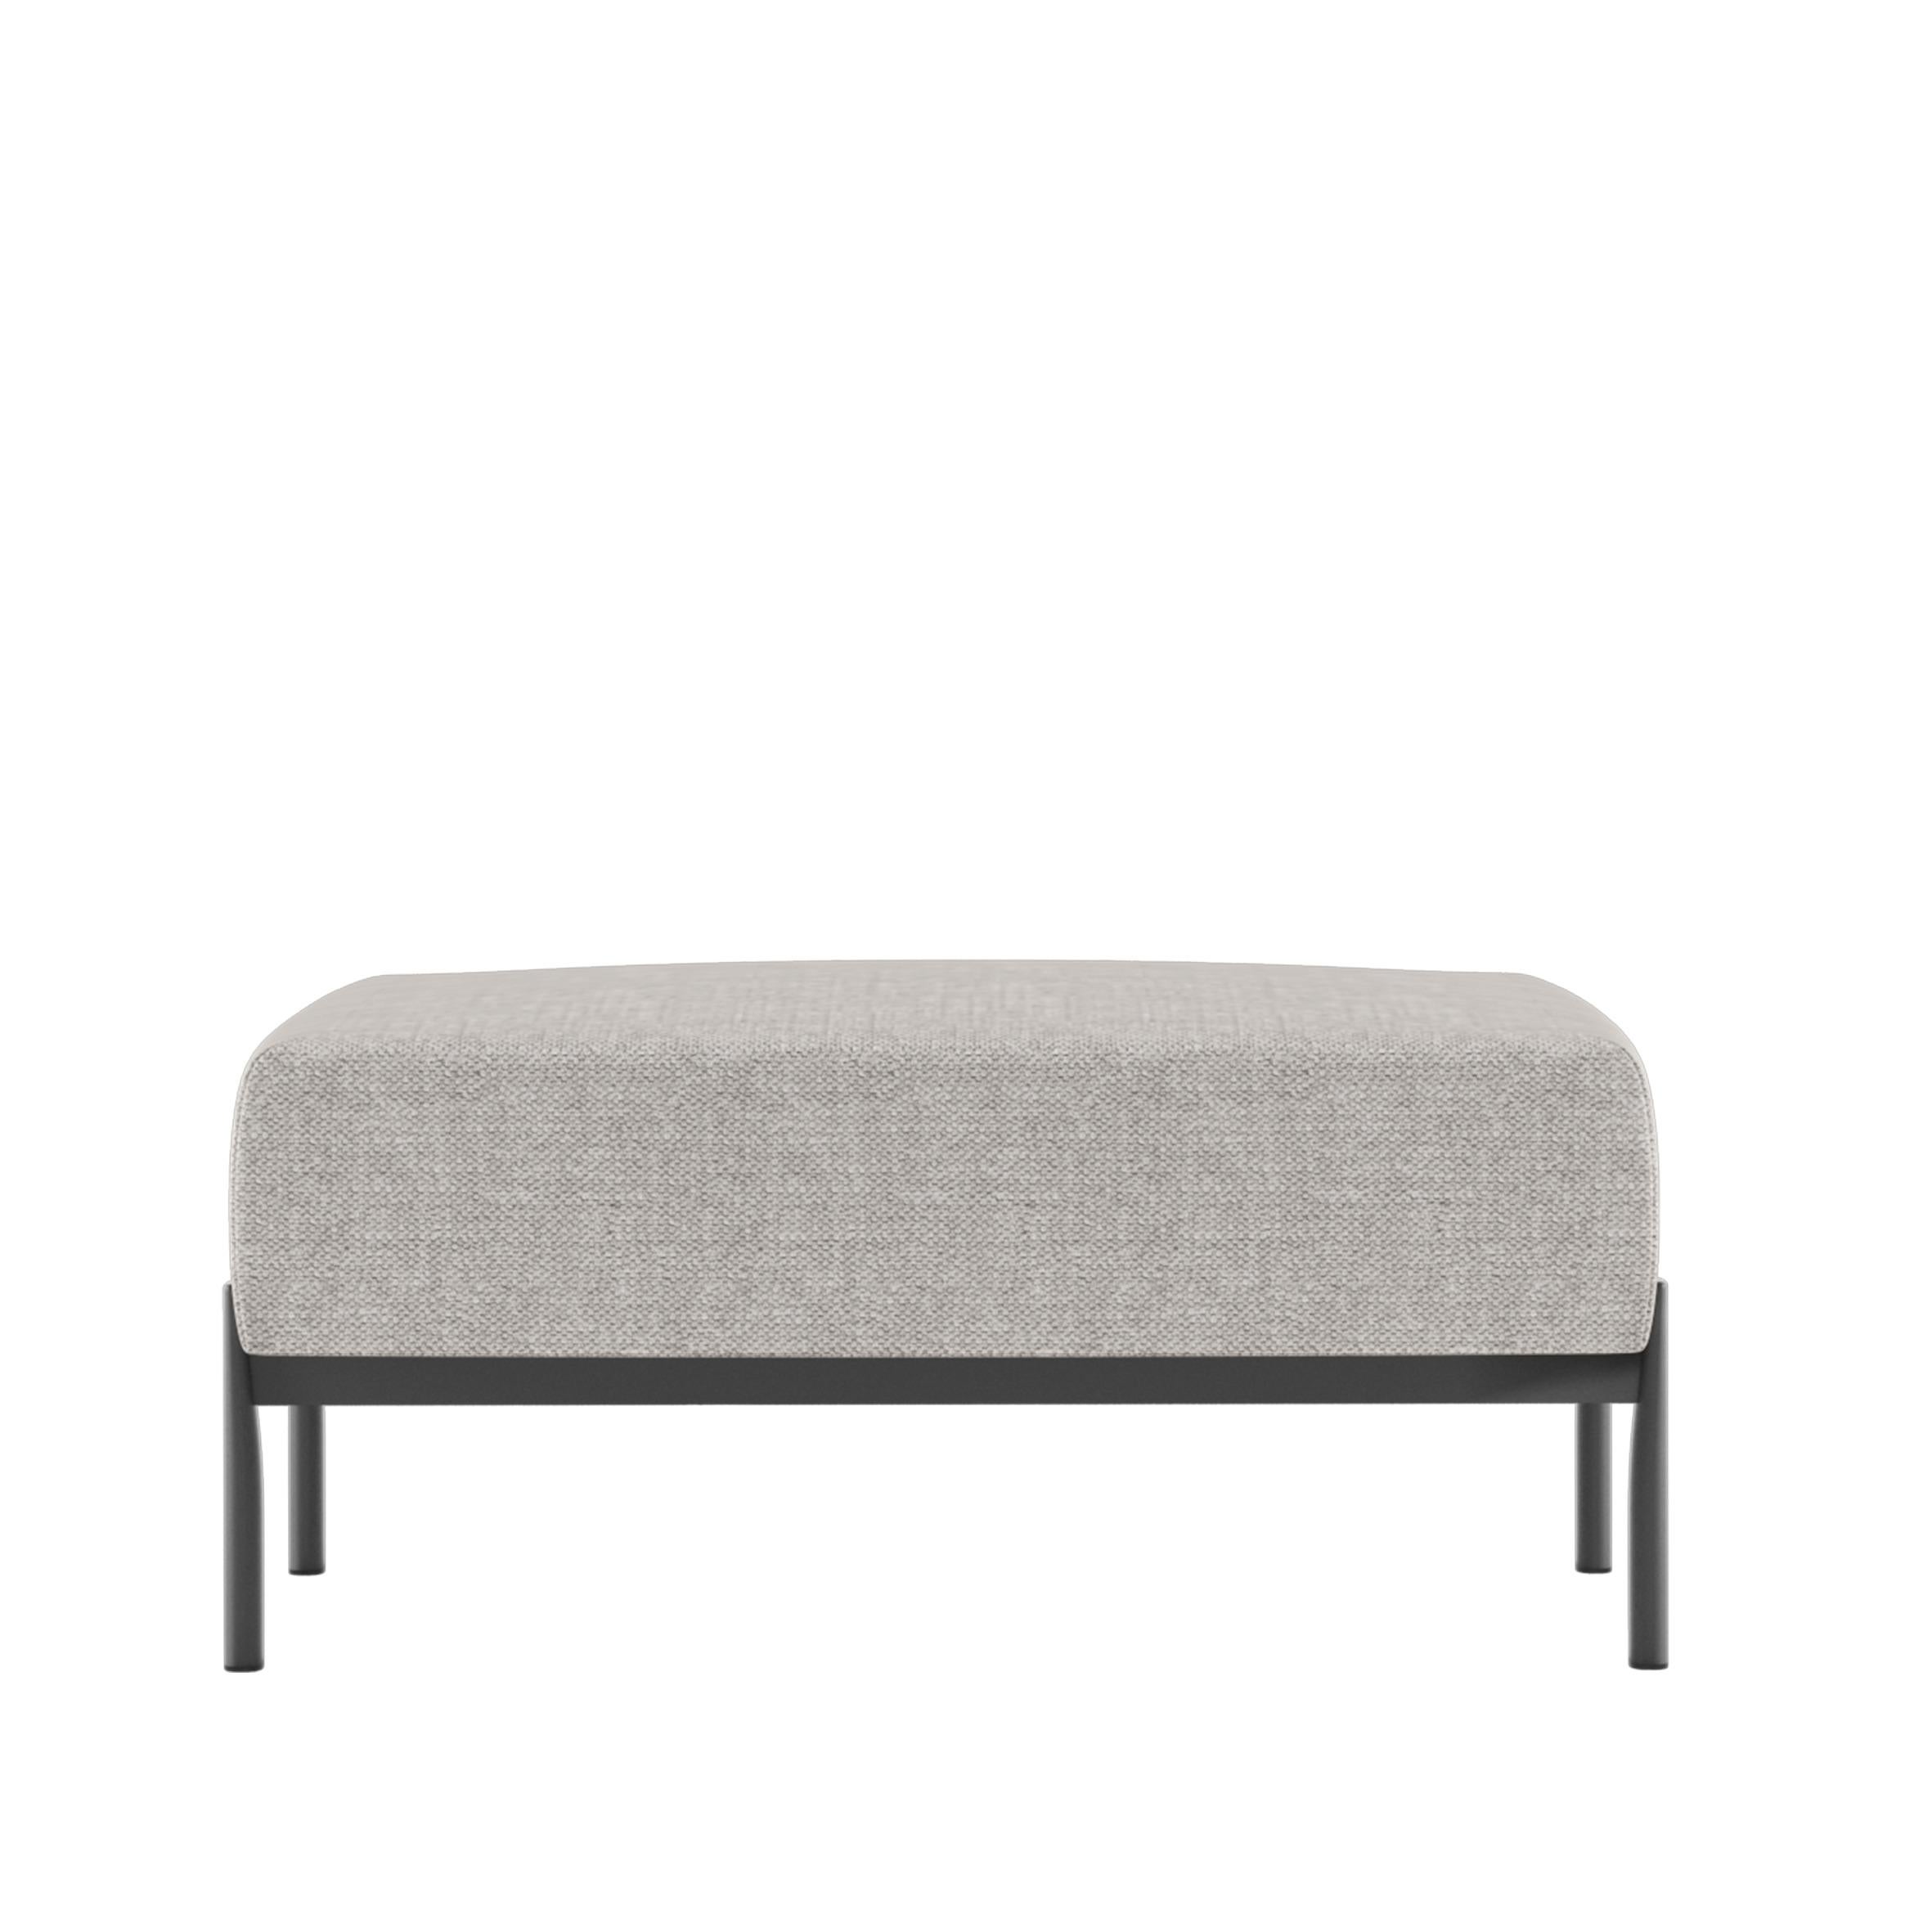 Alias T07_O Ten Outdoor Pouf in Grey with Black Lacquered Aluminum Frame